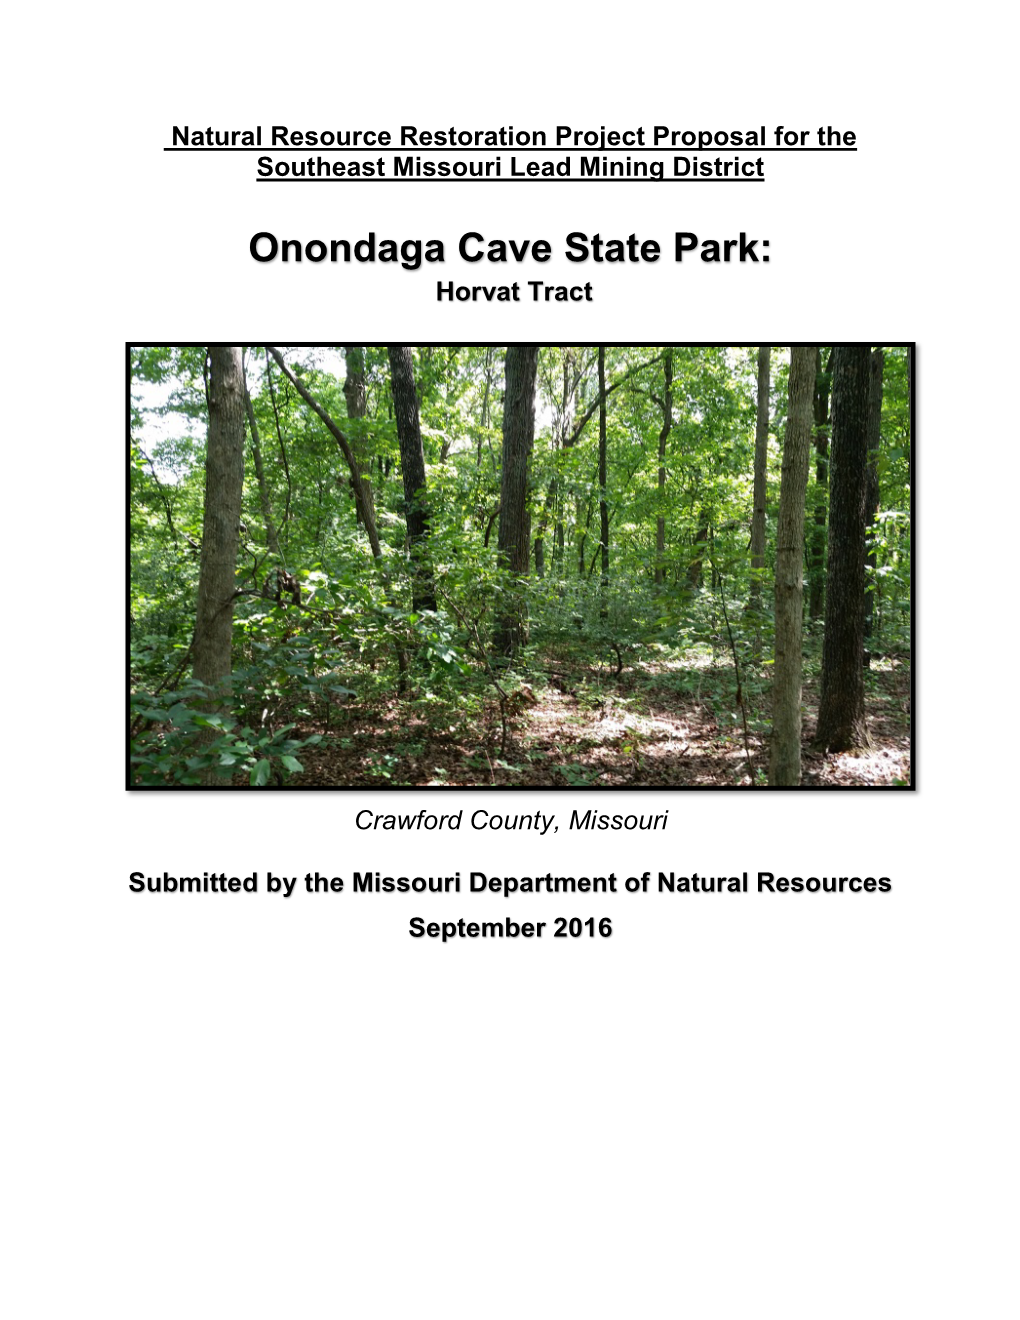 Onondaga Cave State Park: Horvat Tract